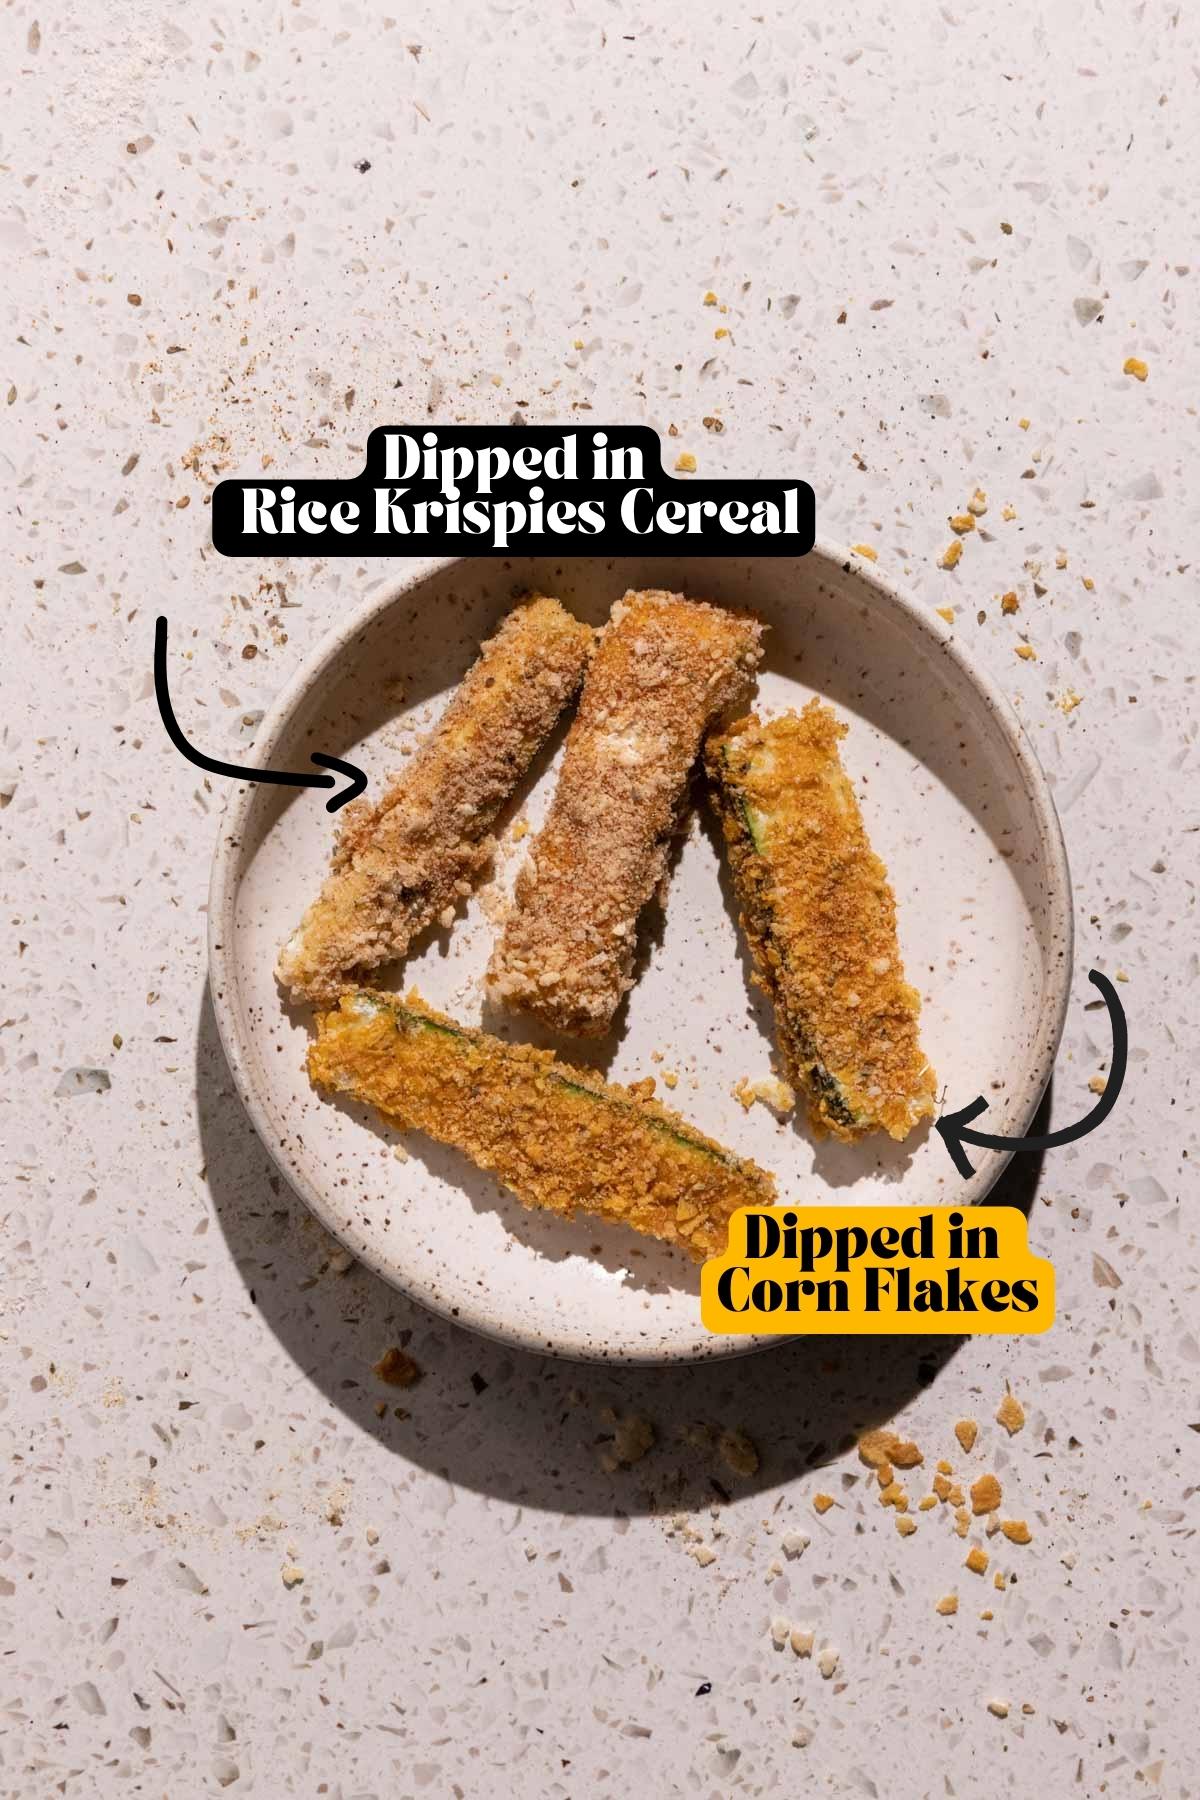 Zucchini Sticks dredged in rice krispies and corn flakes on a plate